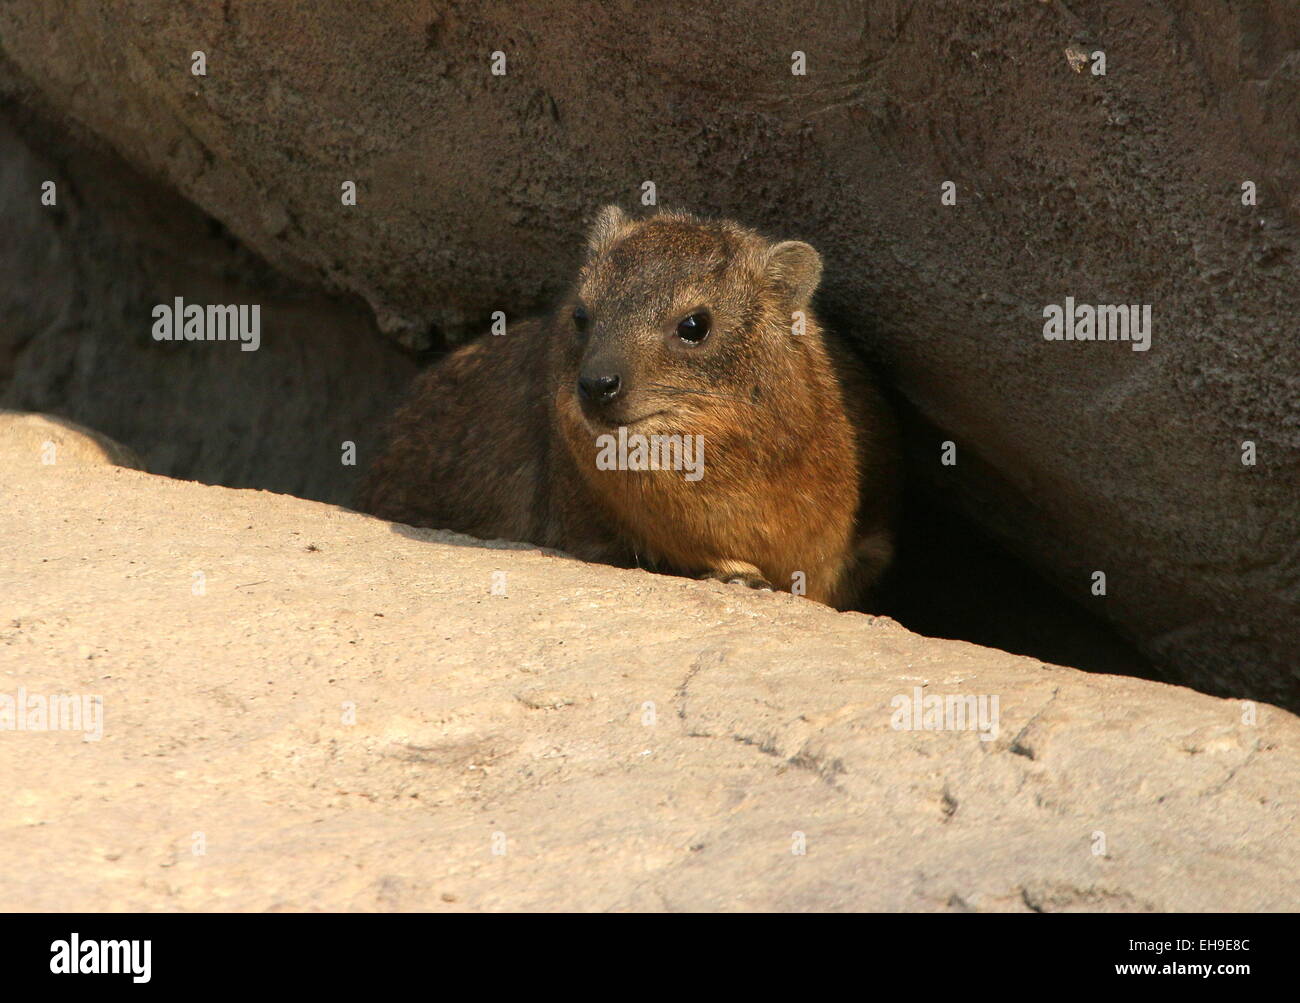 South African Cape or rock hyrax (Procavia capensis), a.k.a. Rock badger or 'Dassie' emerging from a den Stock Photo